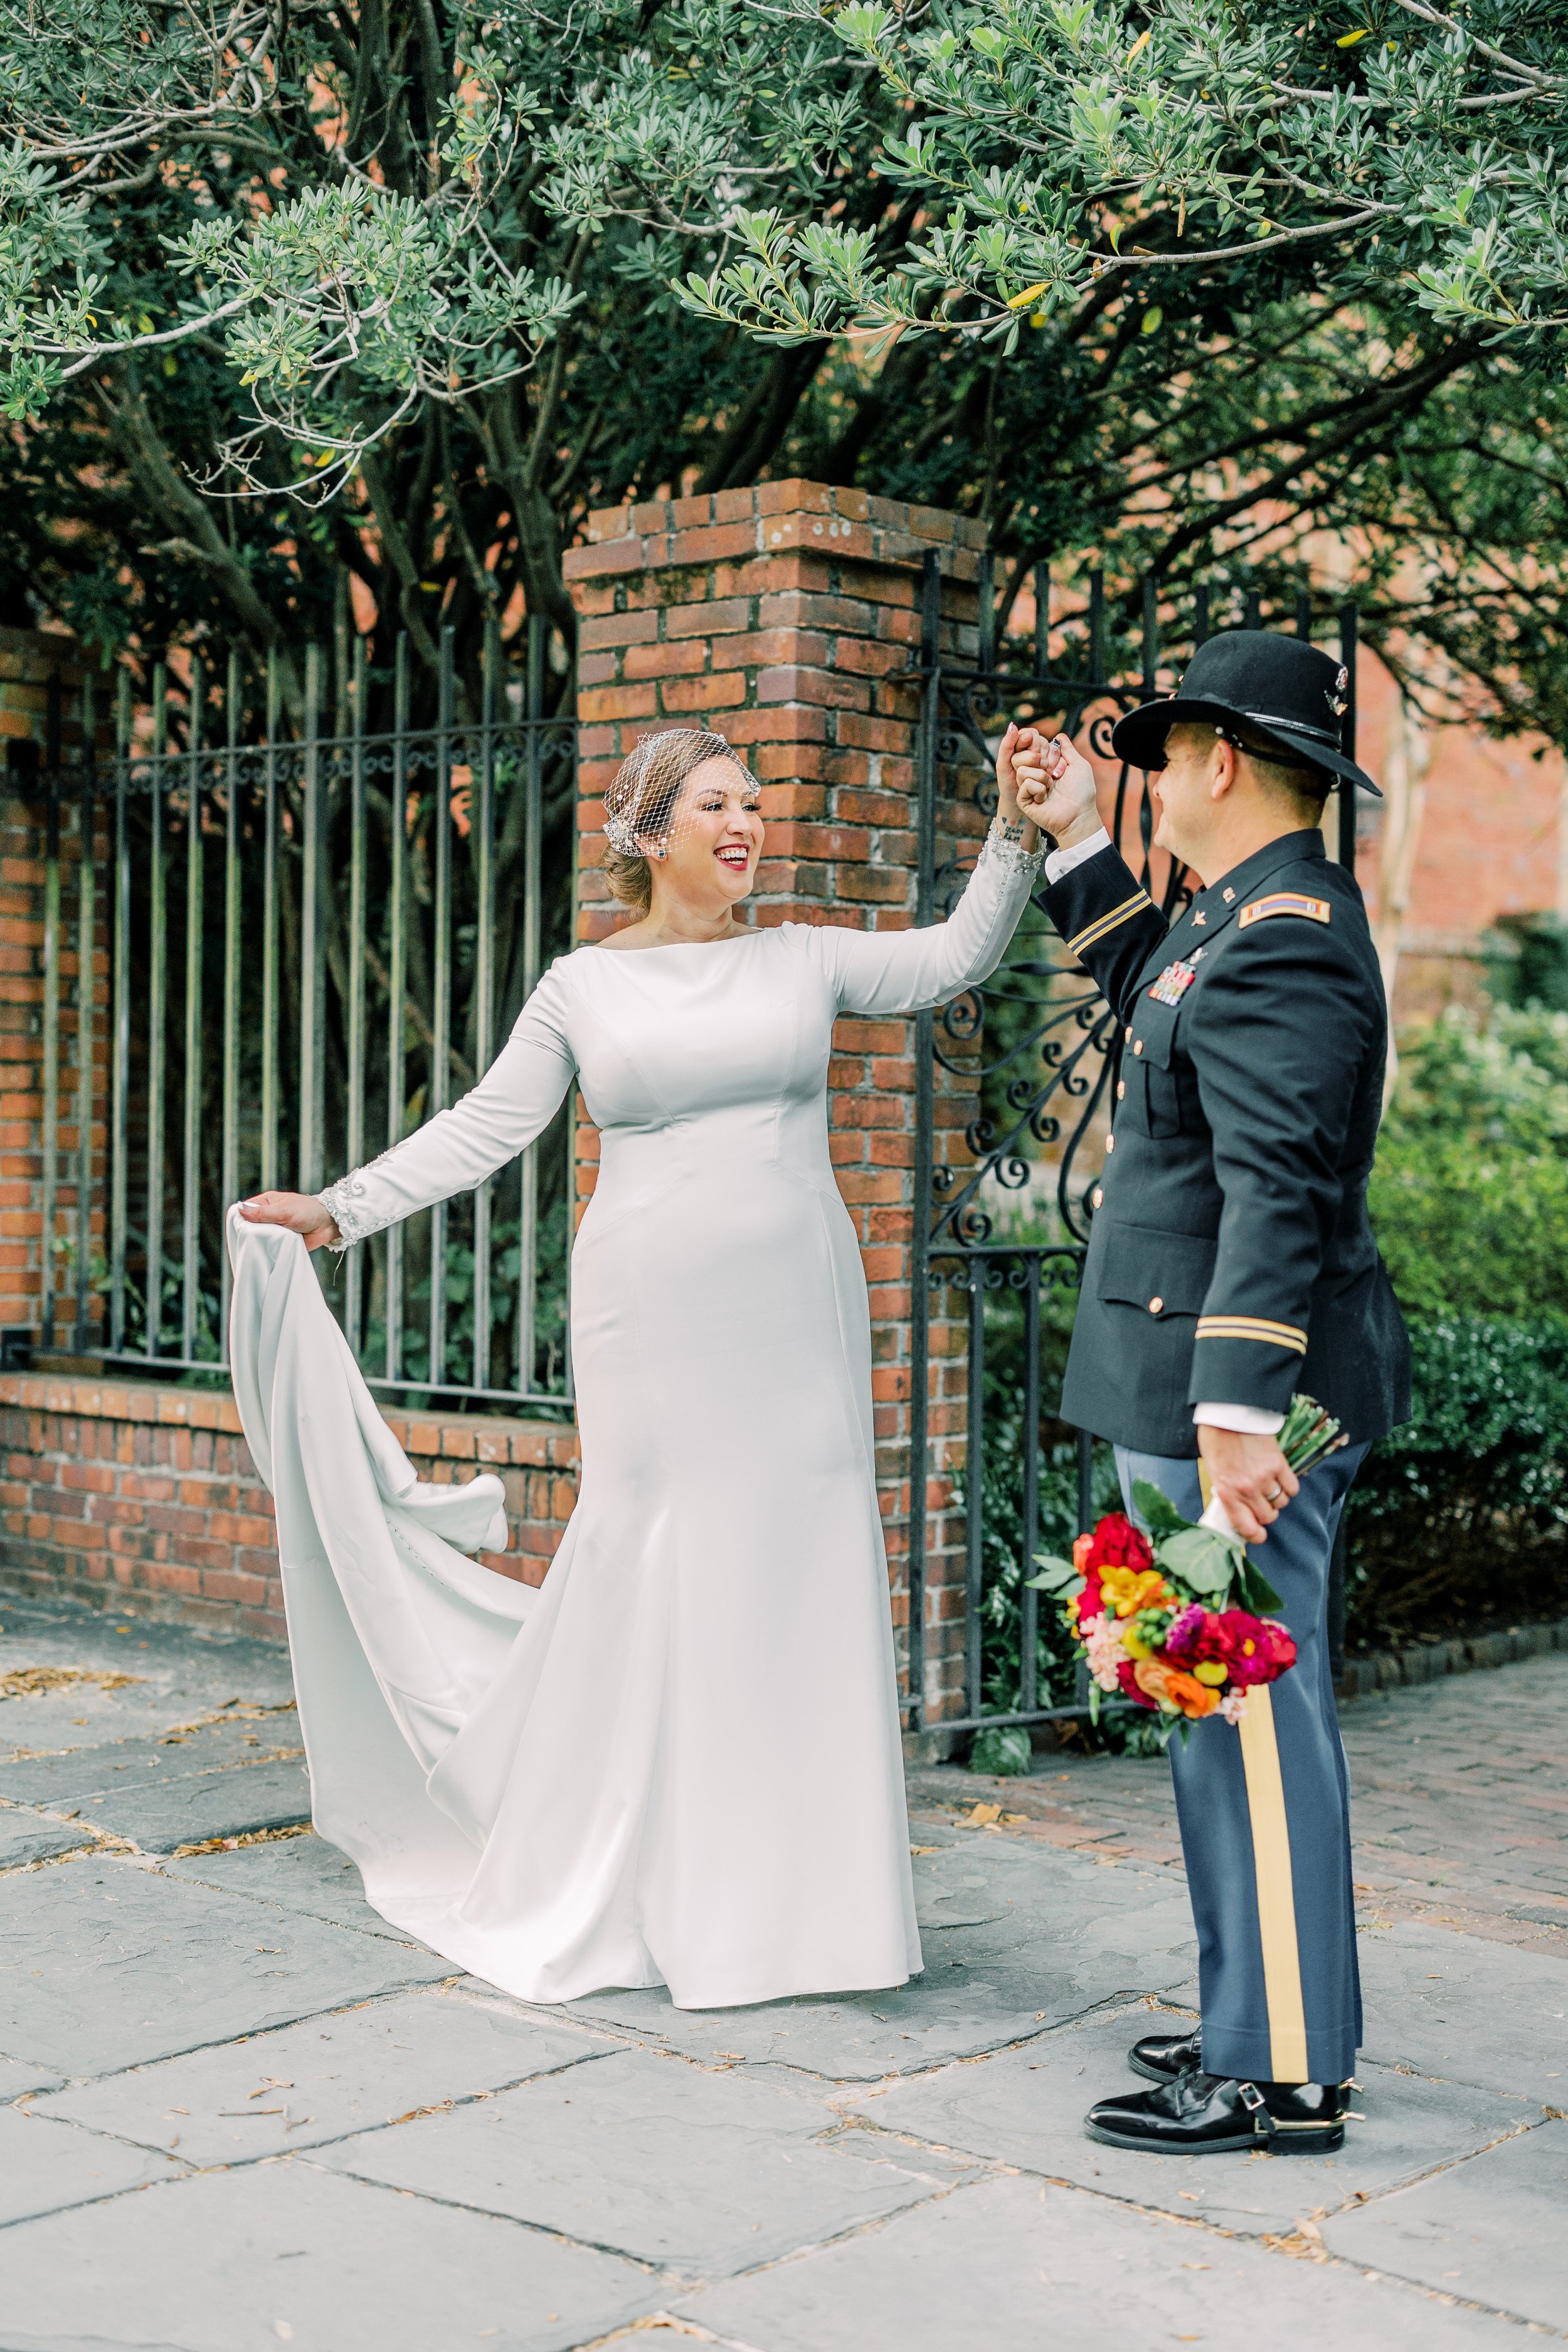 ivory-and-beau-blog-wedding-blog-real-bride-aston-by-sottero-and-midgley-maggie-sottero-wedding-dress-savannah-wedding-savannah-bride-savannah-bridal-shop-davenport-house-wedding-Rachel Linder Photography_Savannah Wedding Photographer-263.jpg